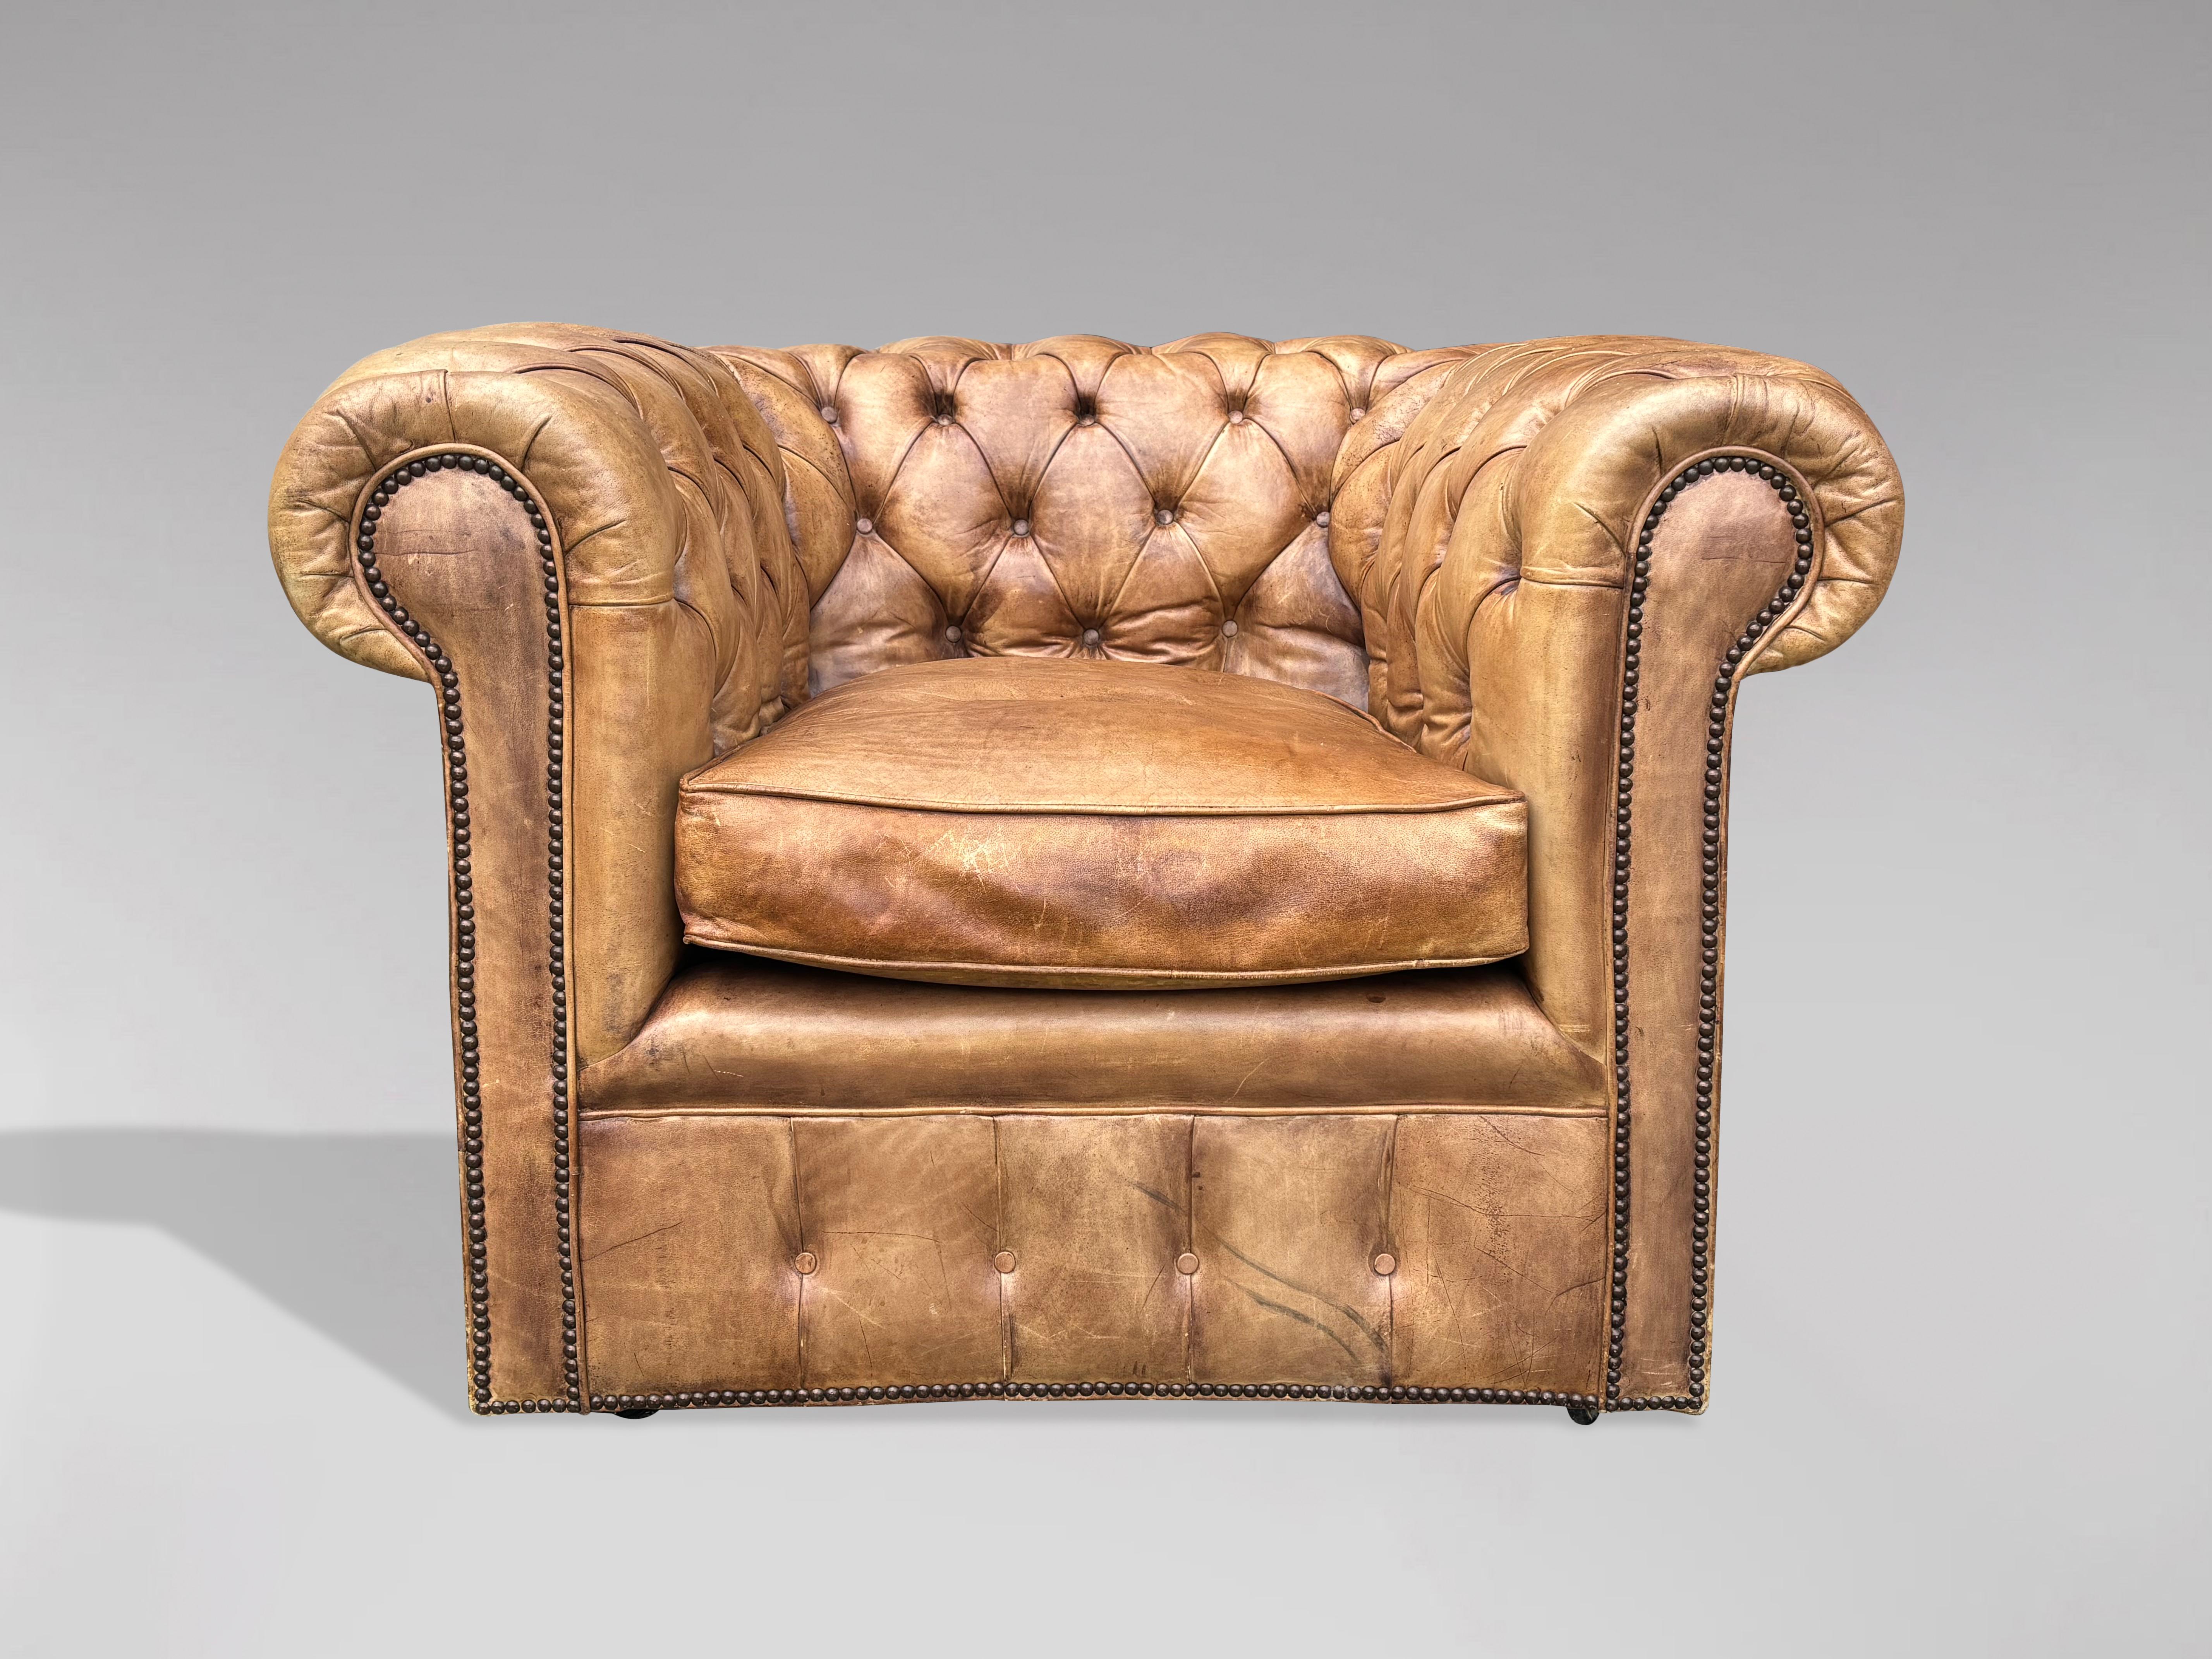 Pair of 19th Century Beige Leather Chesterfield Club Armchairs In Good Condition For Sale In Petworth,West Sussex, GB